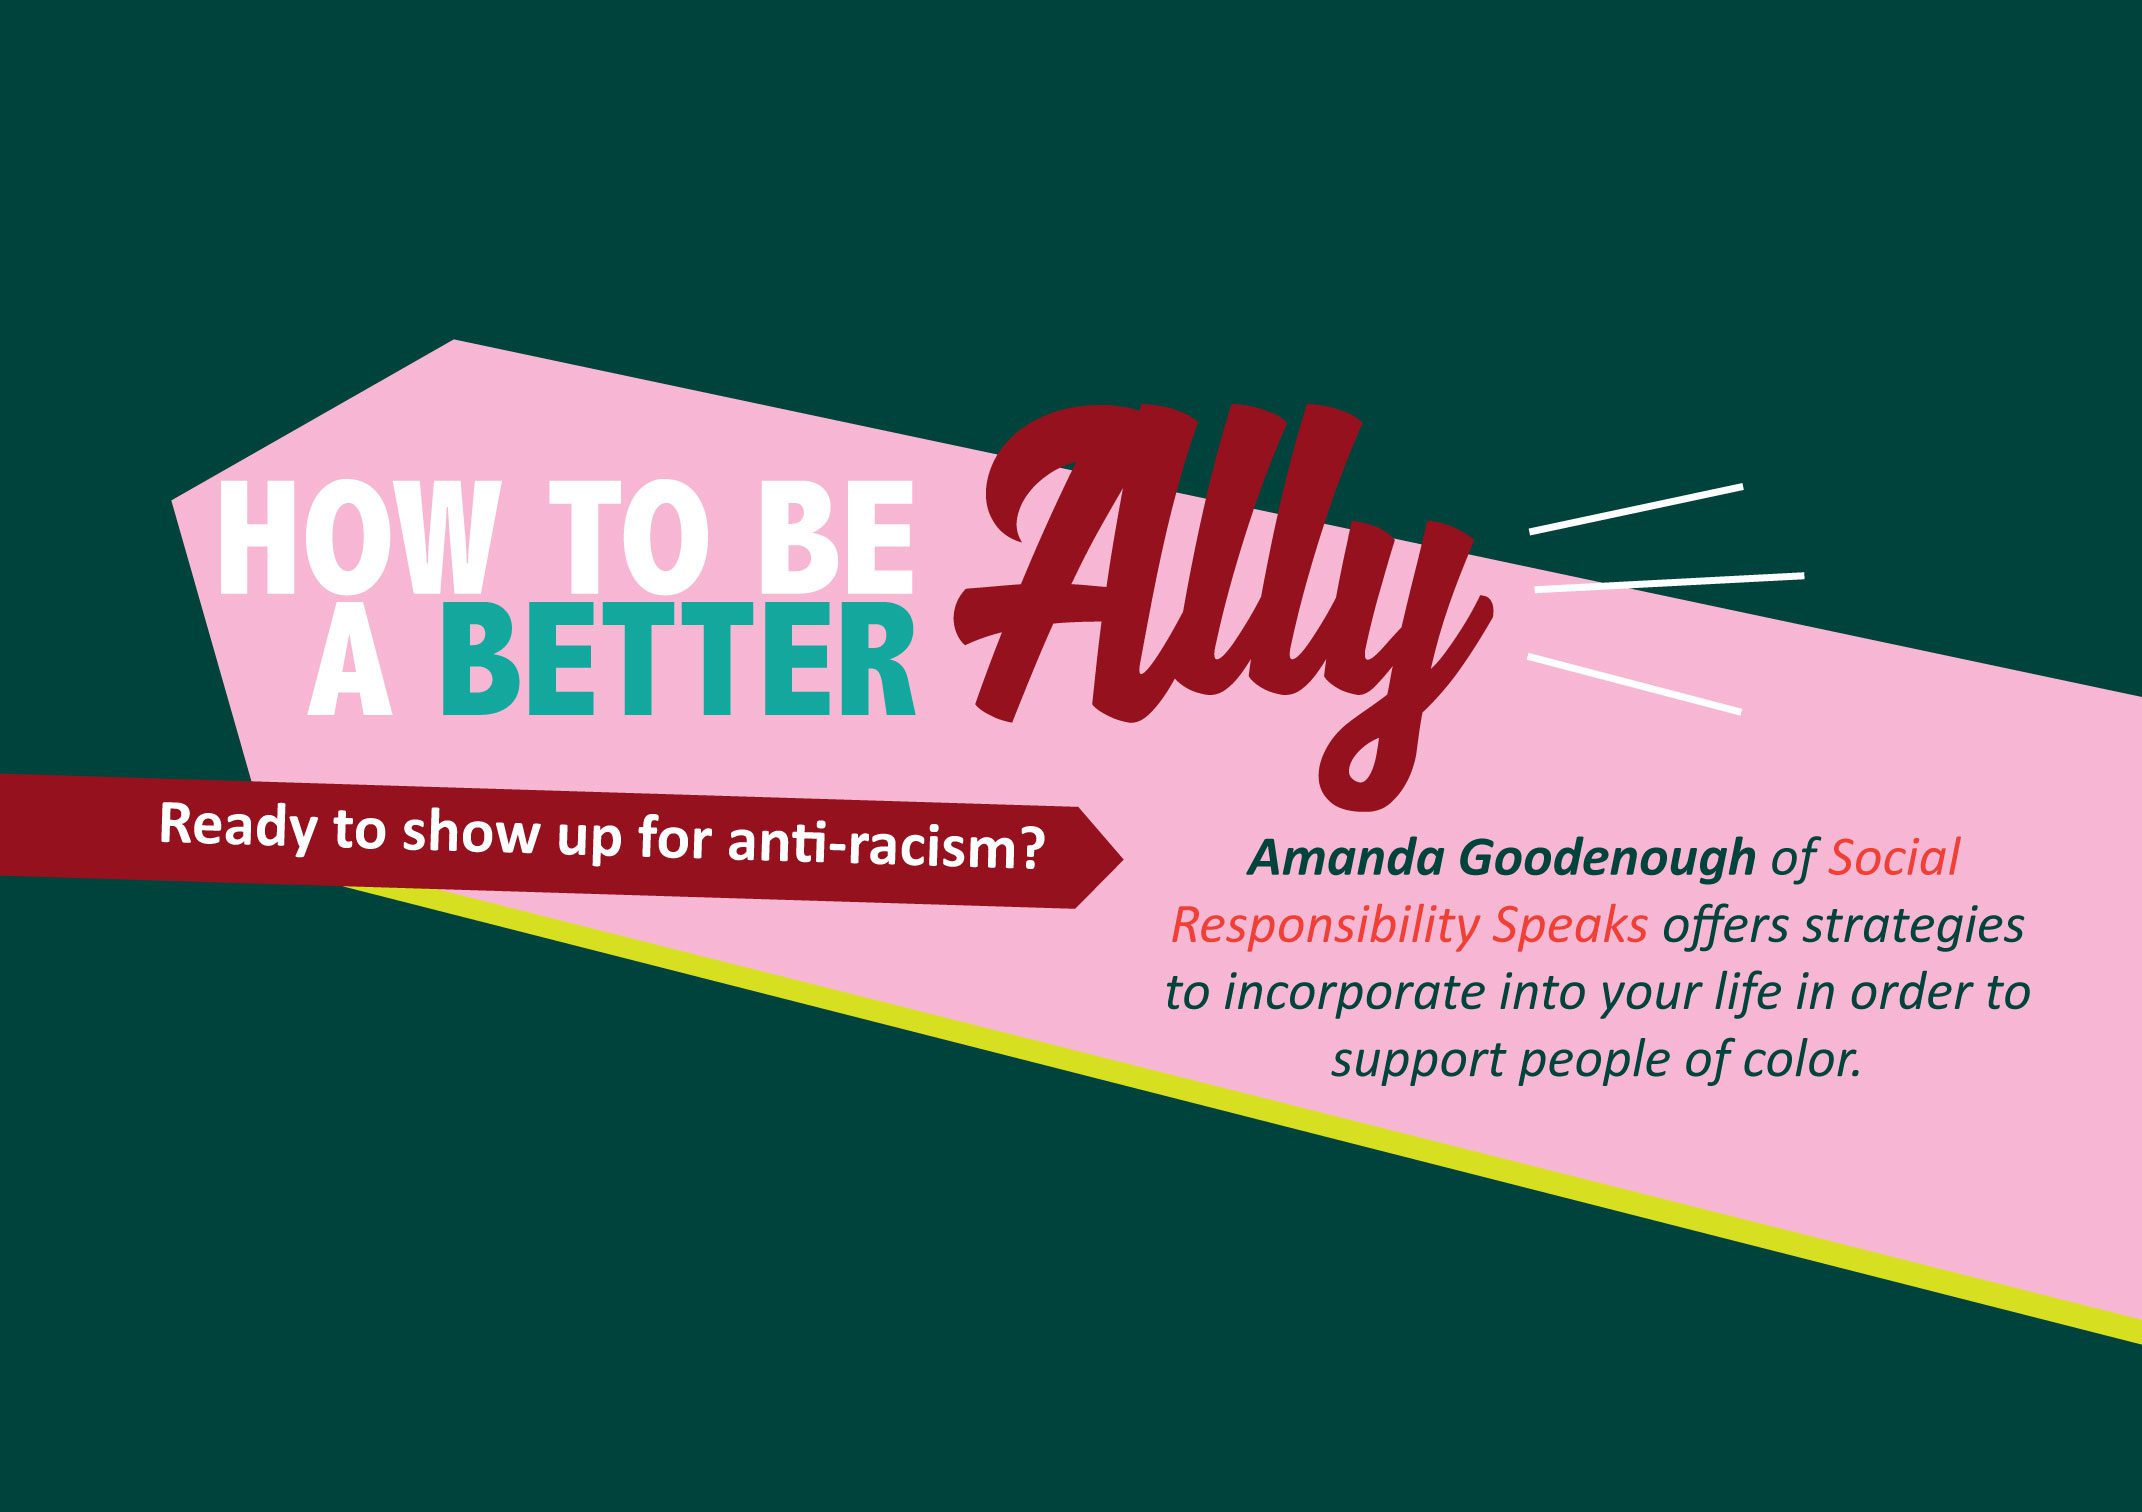 How to Be a Better Ally